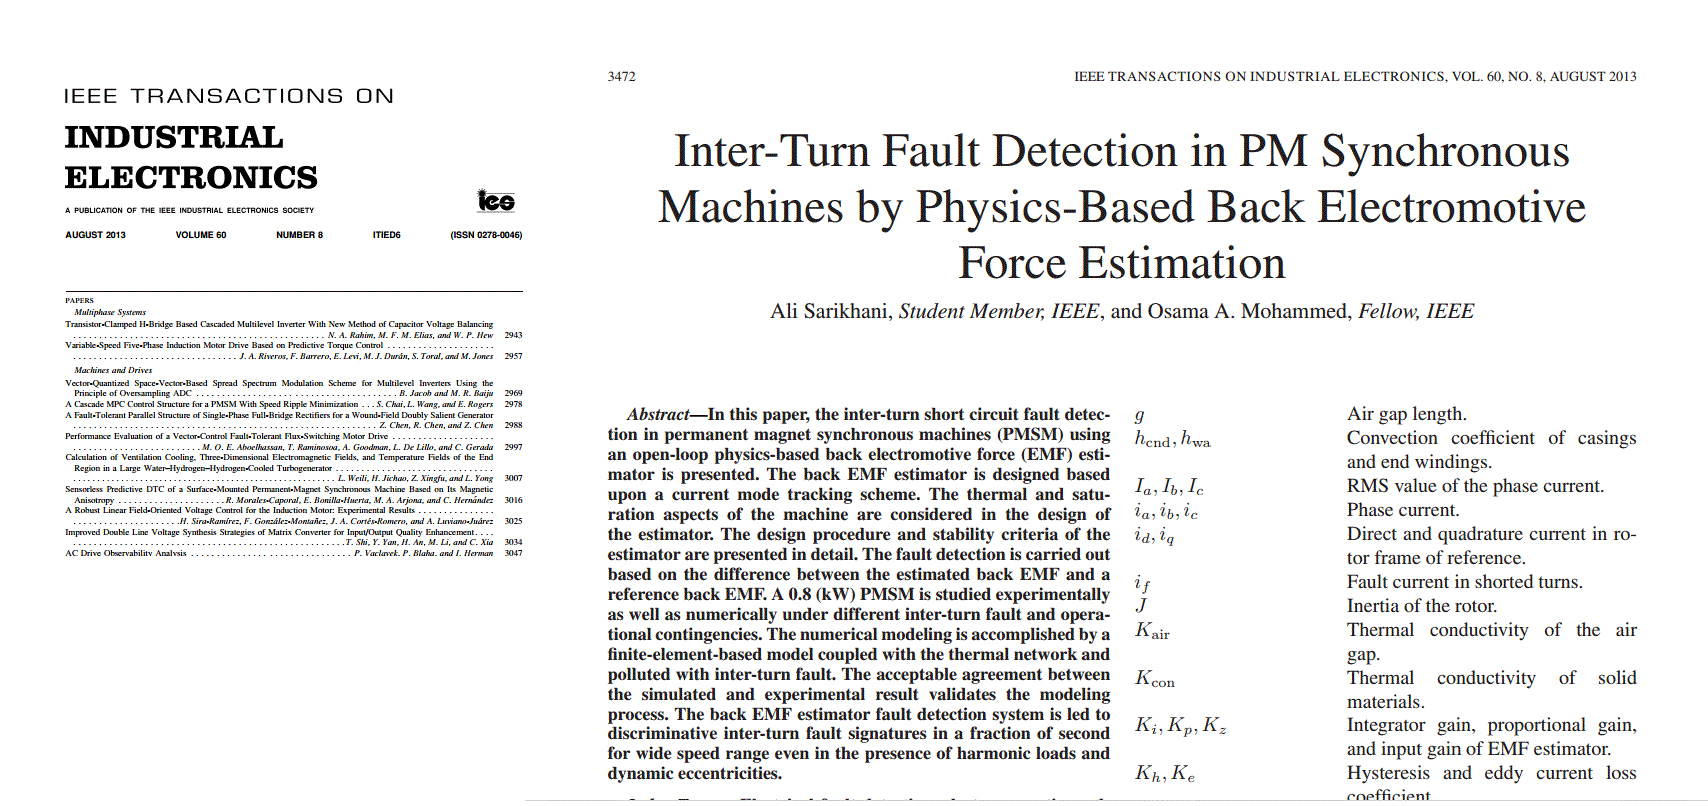 Inter-turn Fault Detection in PM Synchronous Machines by Physics-based Back Electromotive Force Estimation